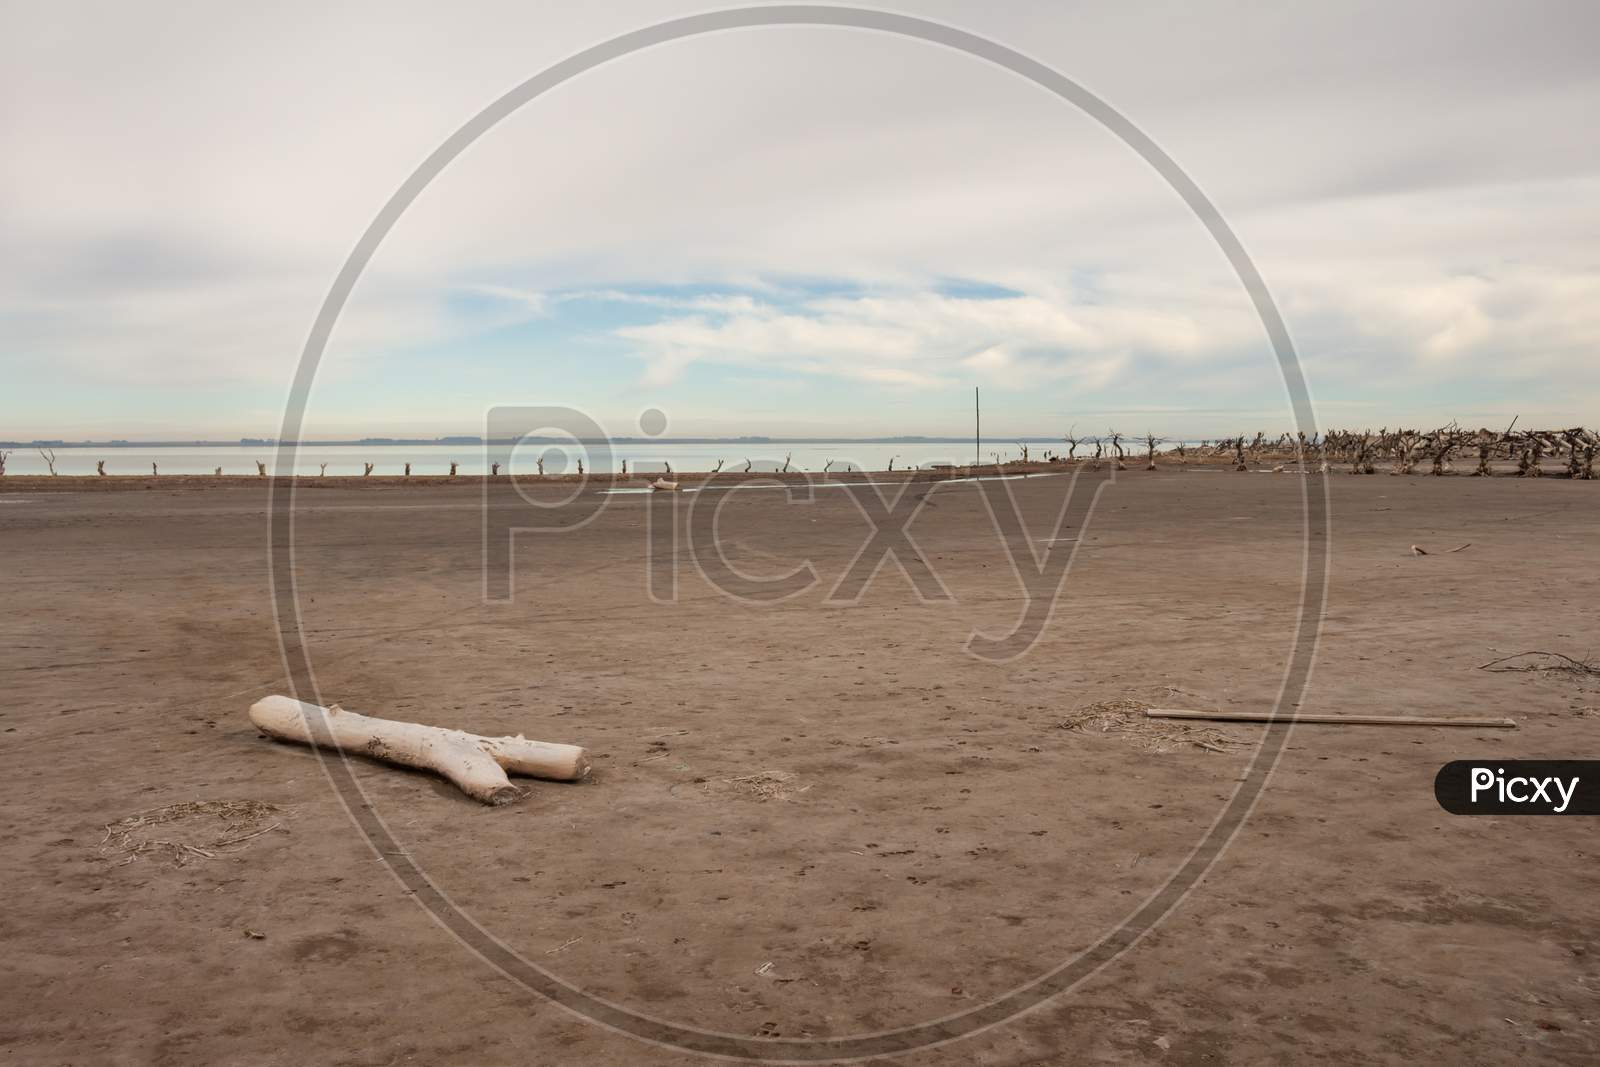 Dead Trees In The Lake. City Of Epecuen Submerged. Desolate Landscape